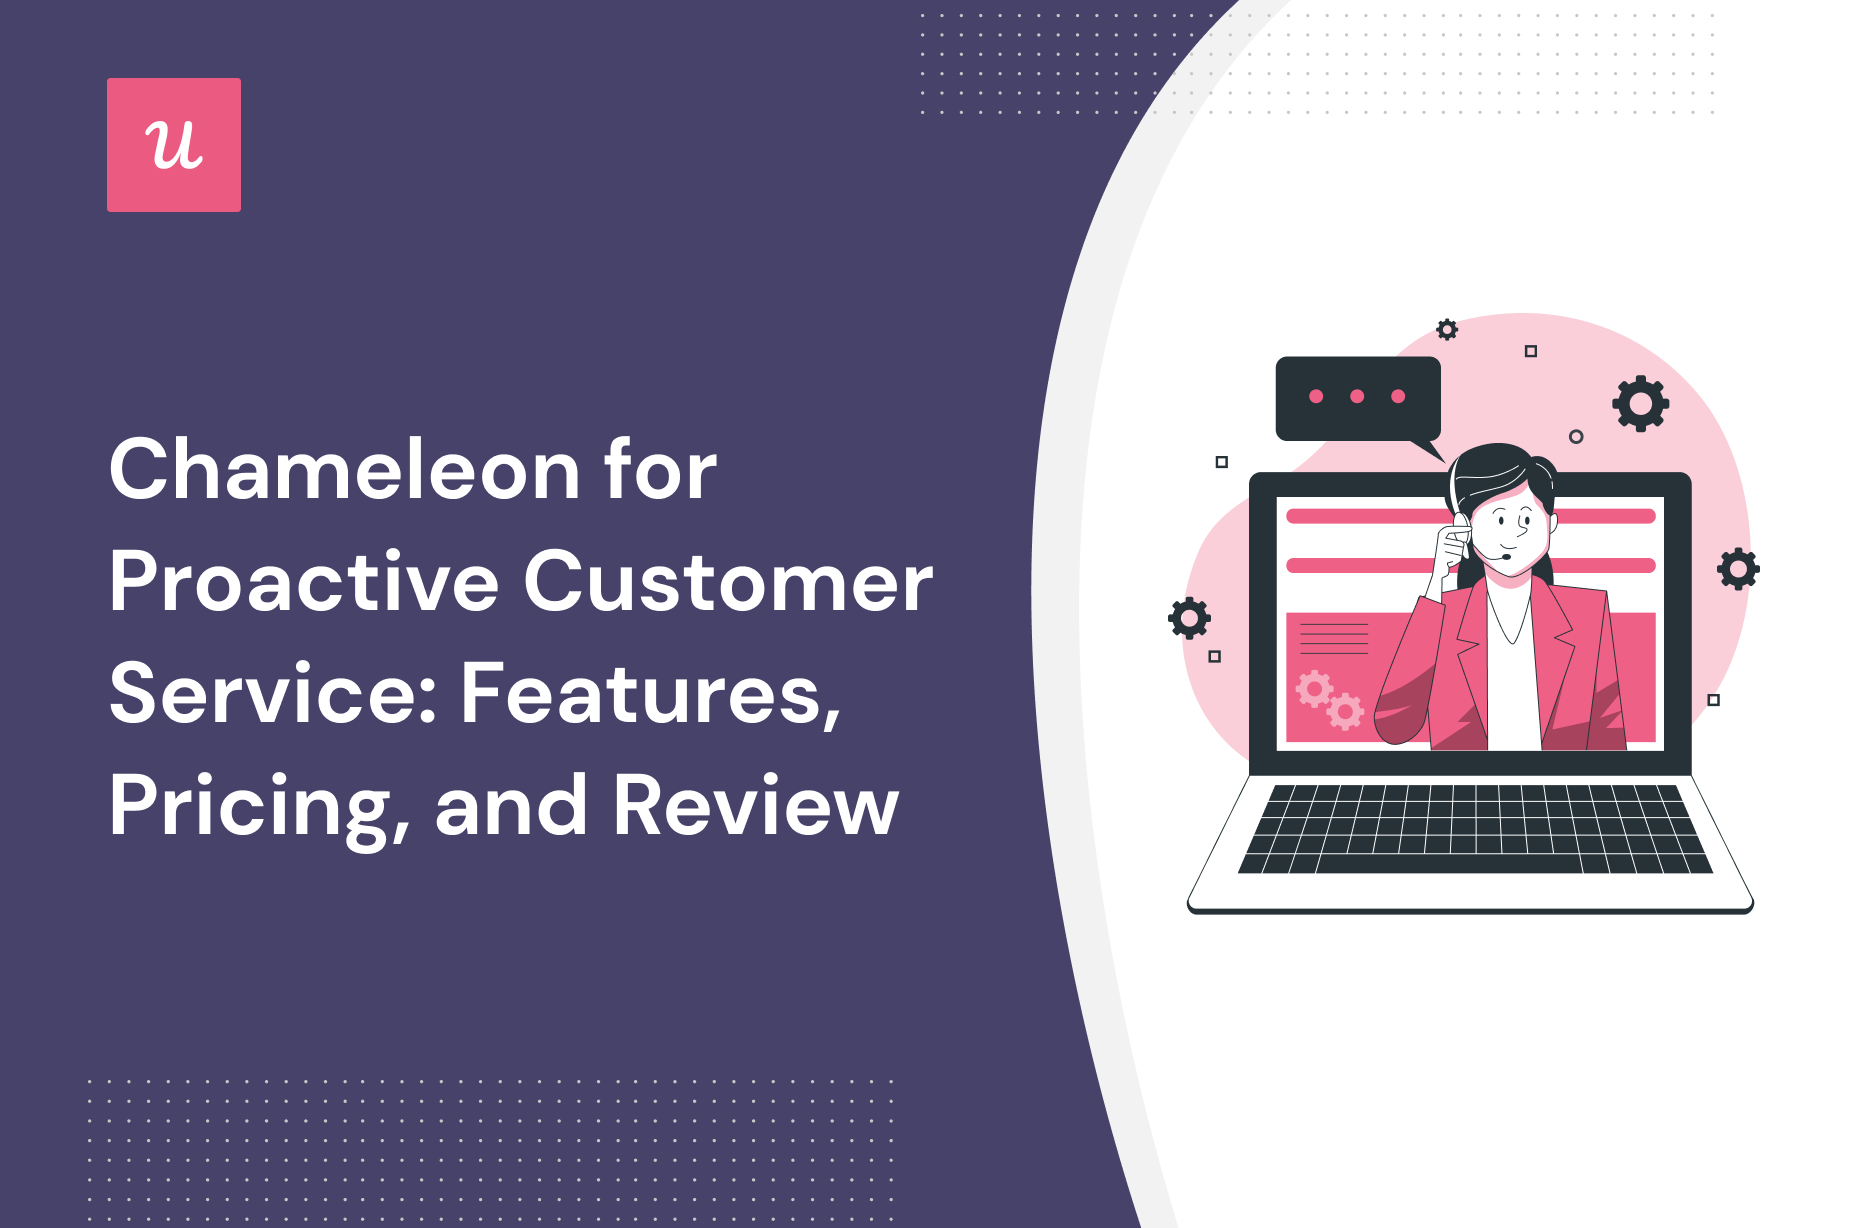 Chameleon for Proactive Customer Service: Features, Pricing, and Review